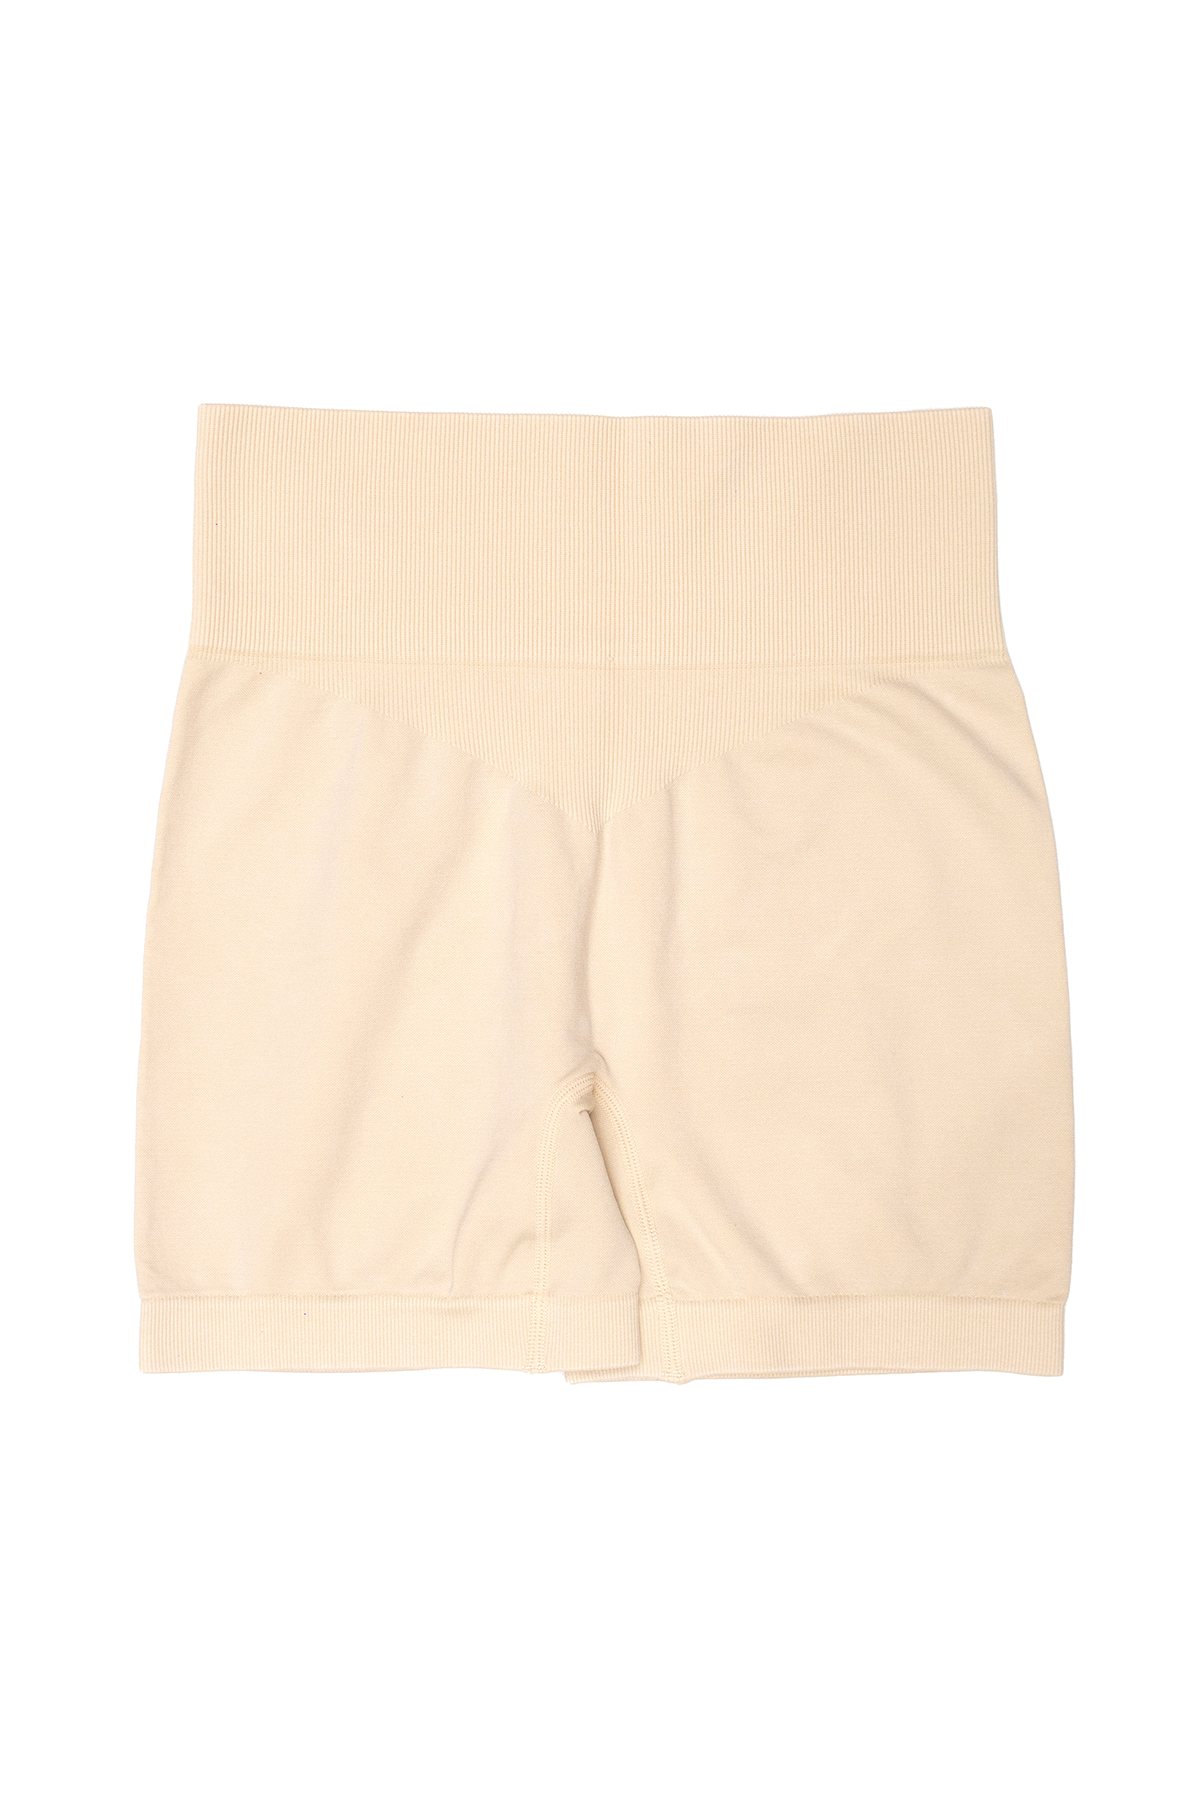 Time-Out-X-High-Waist-Seamless-Workout-Shorts—Creamy-White—Back